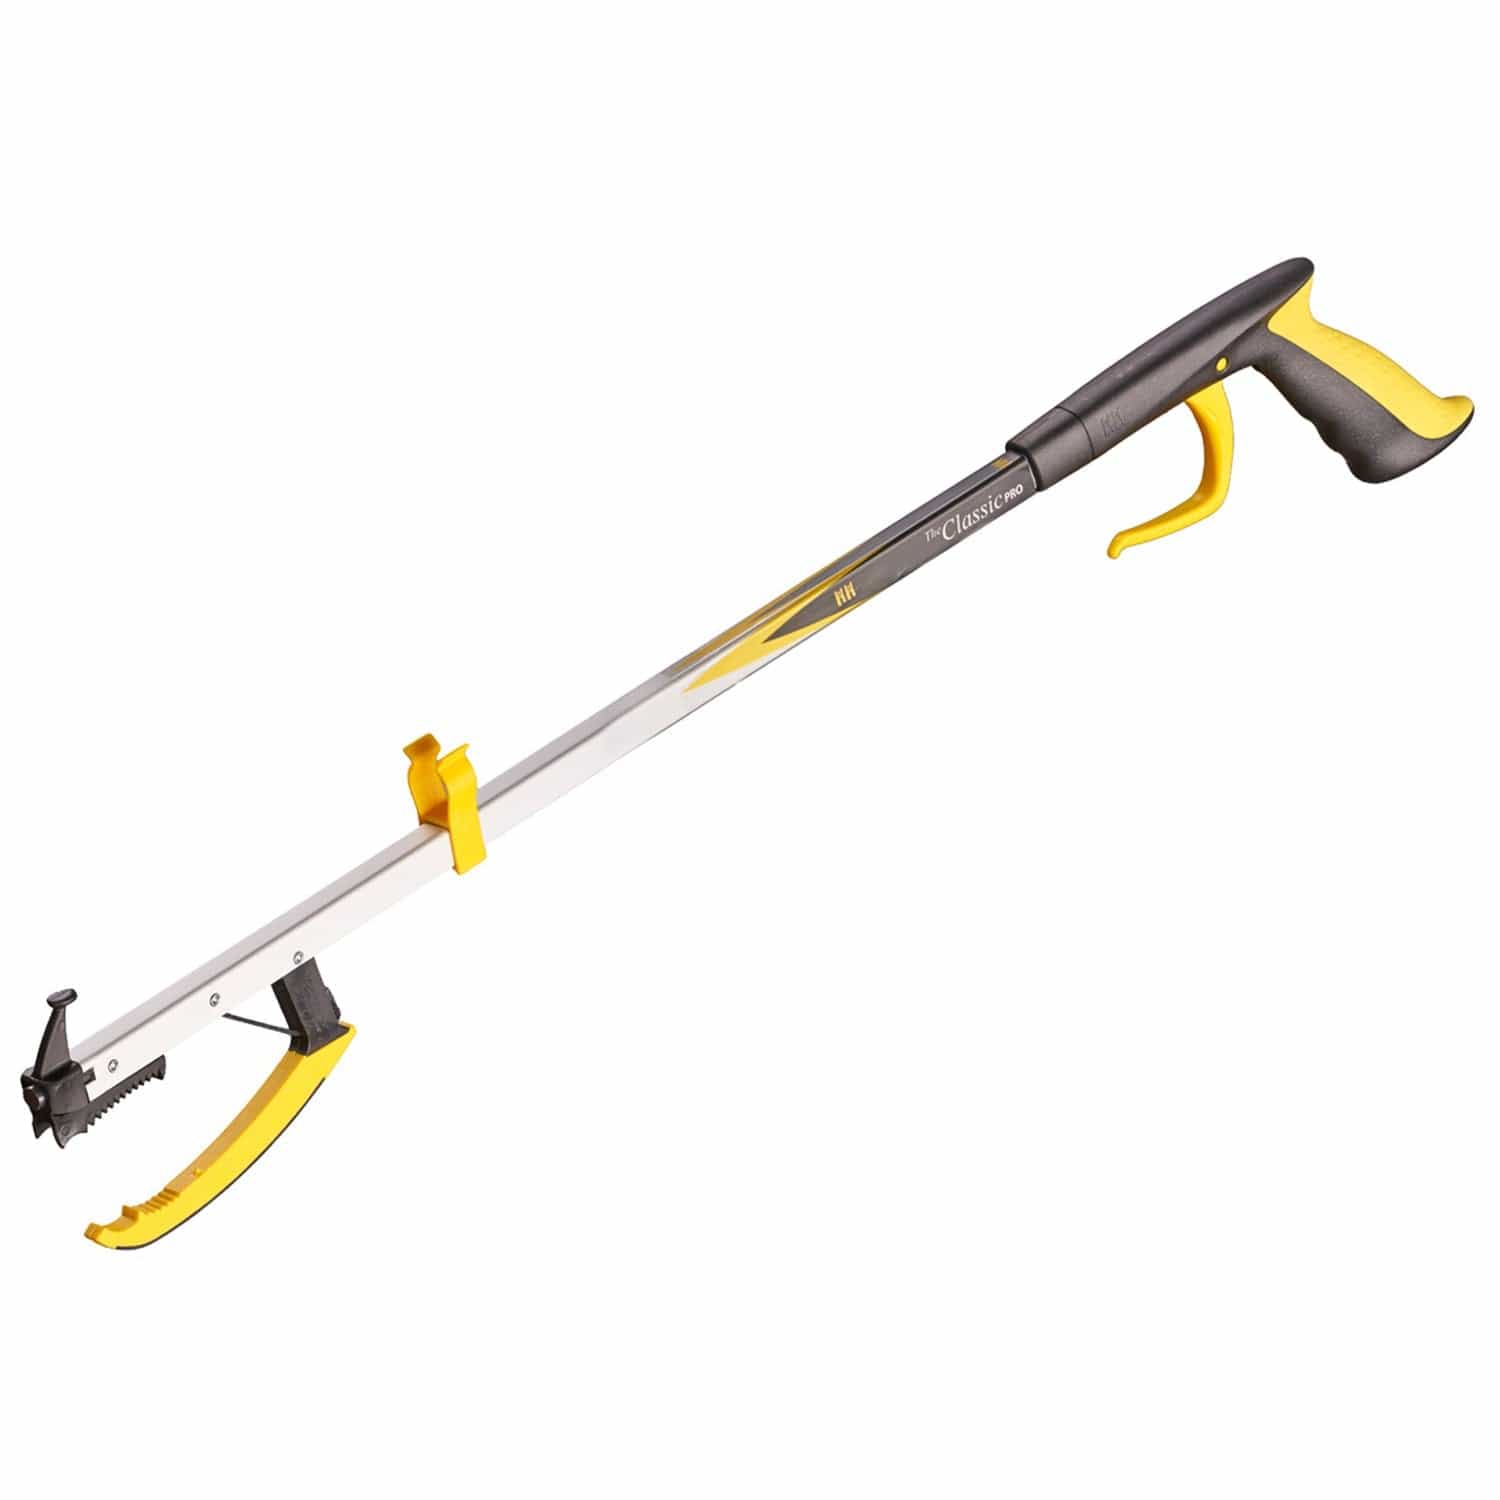 The Helping Hand Company daily living aids Standard - 26" Classic Pro Reacher - VAT Free